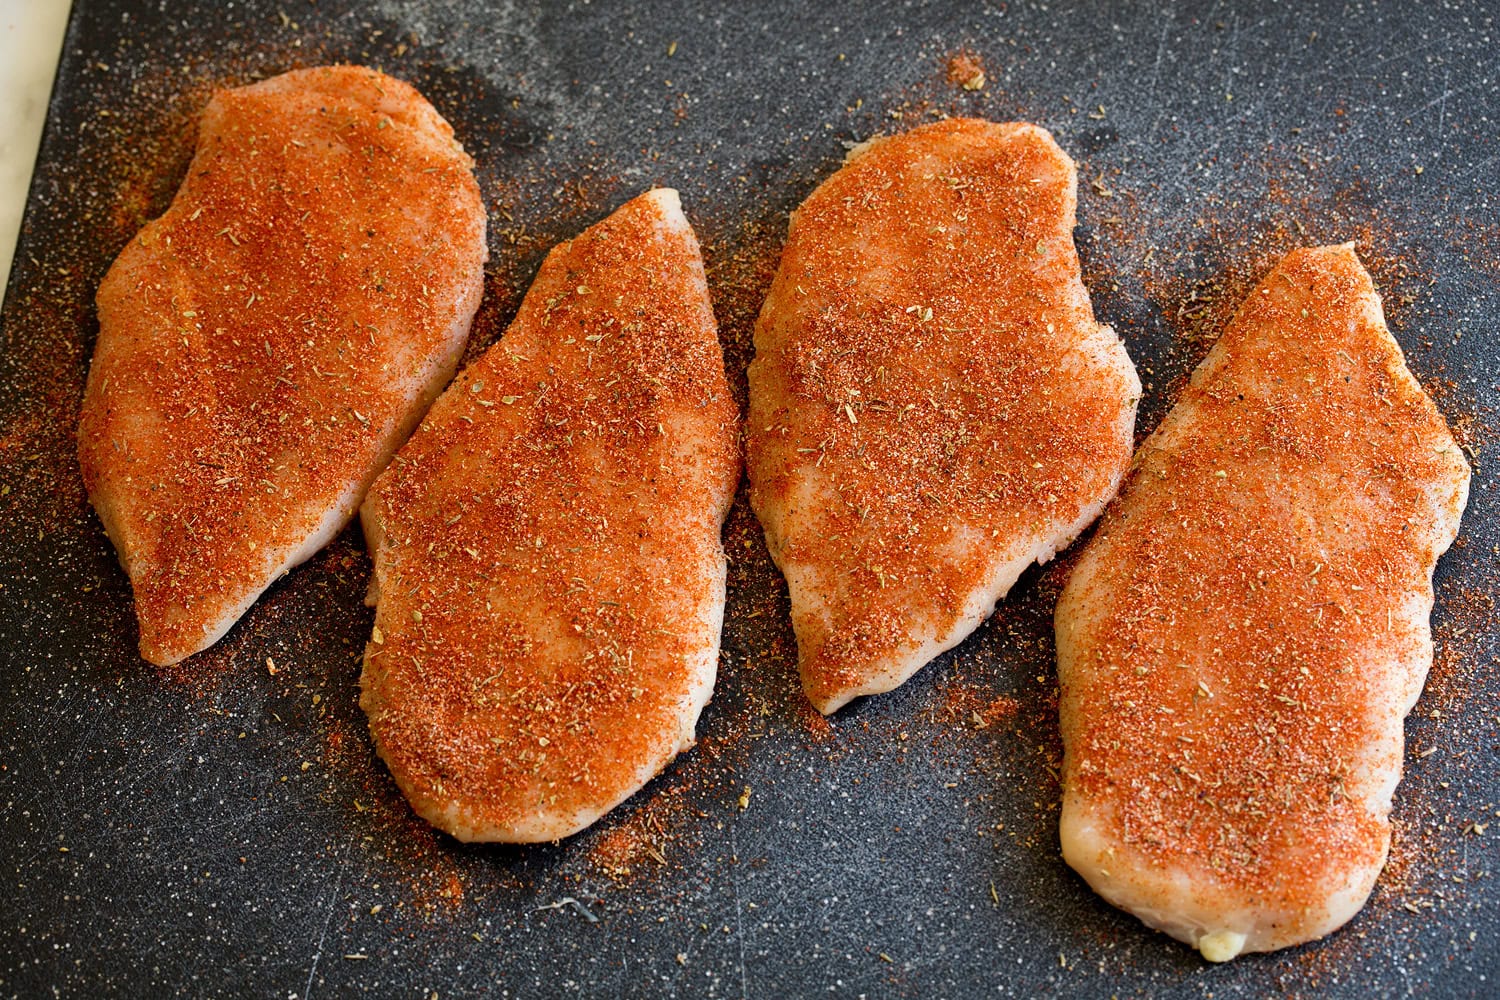 Spice seasoned chicken breasts shown before cooking.